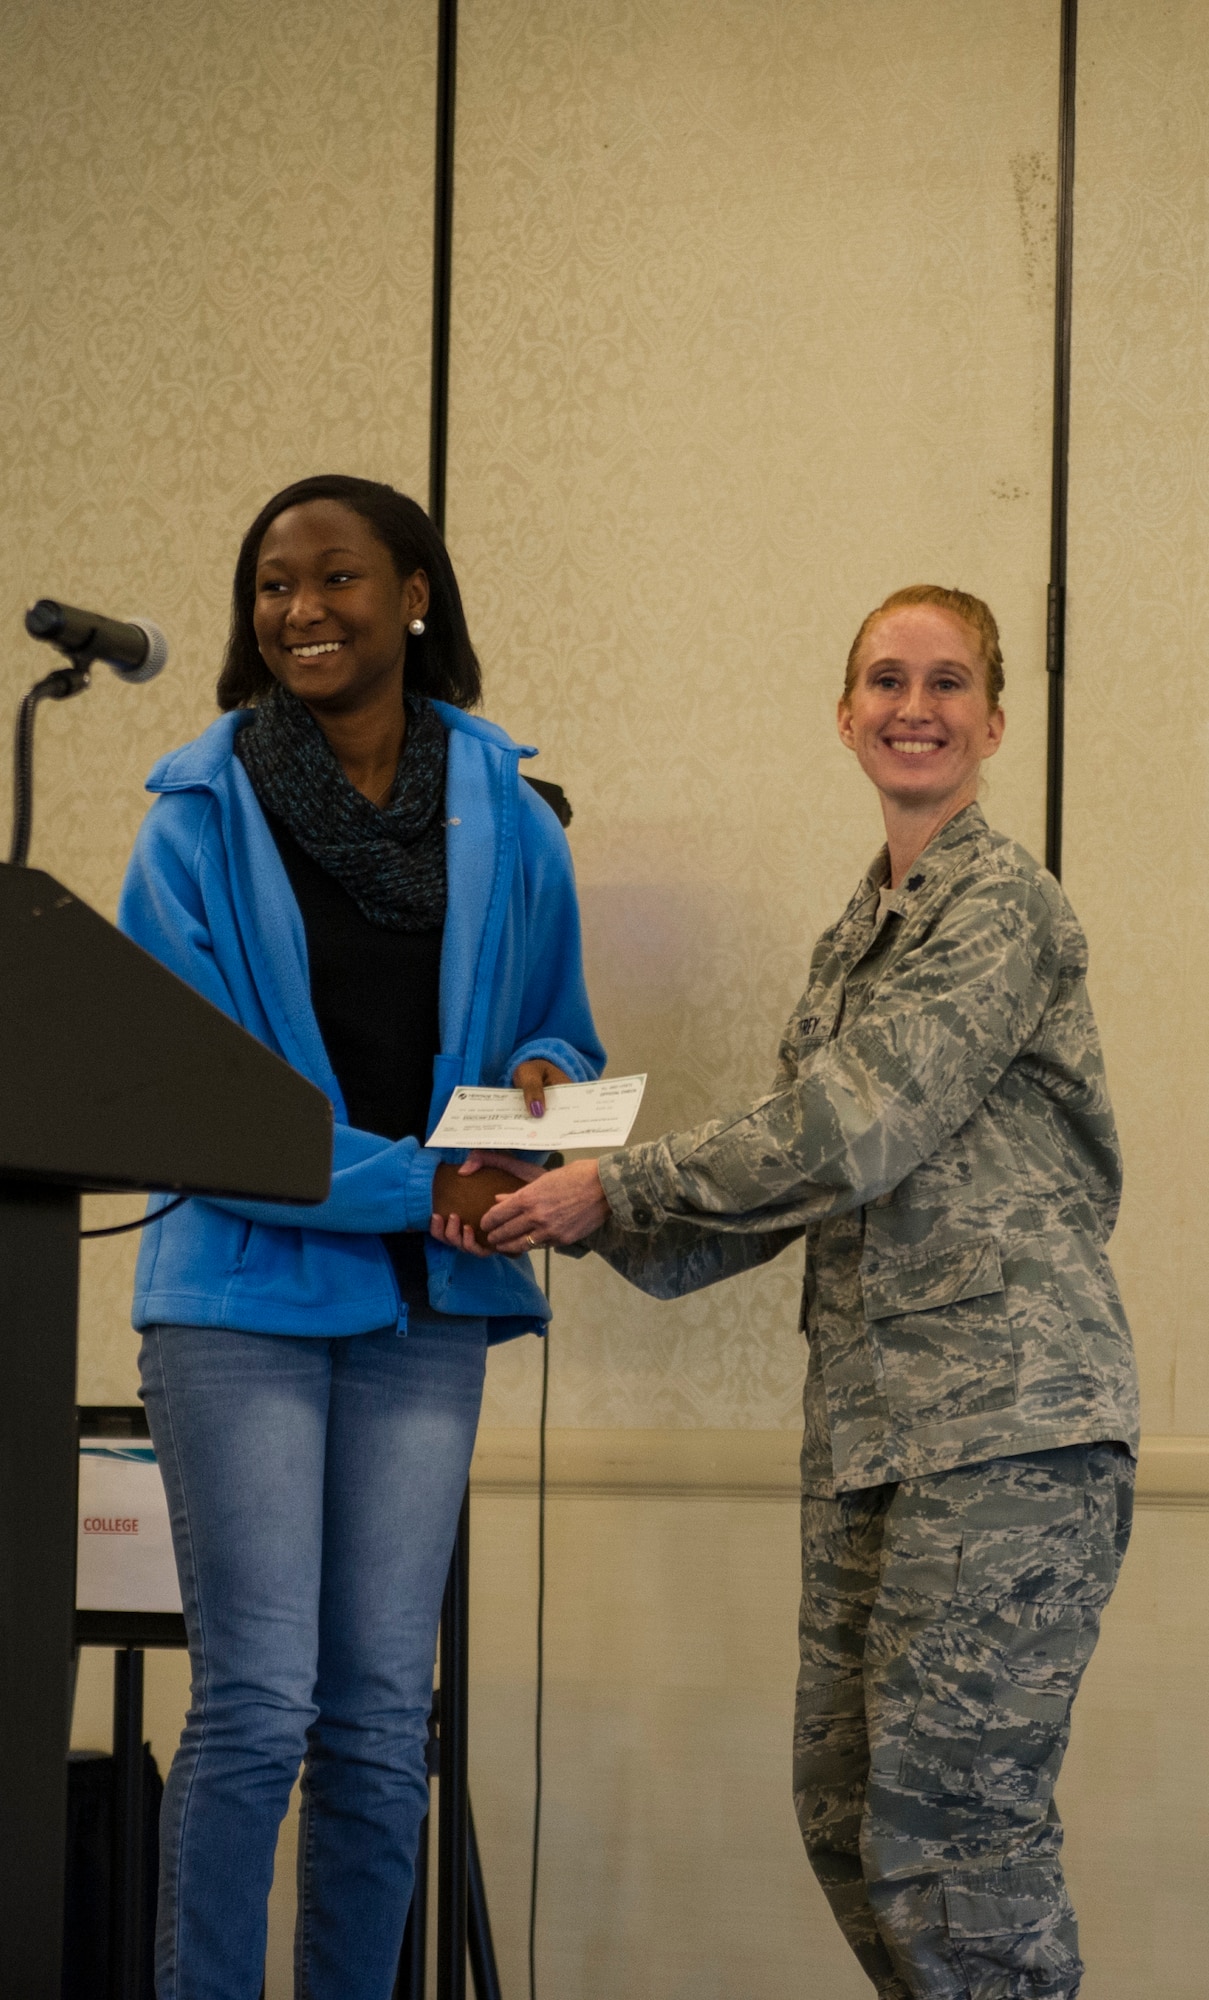 Lt. Col. Mary Jeffrey, 315th Operations Group executive officer, congratulates Shanyla Moultrie, of Cane Bay High School, for placing third place in the Women in Aviation Career Day essay contest. Over 130 middle and high school girls from 12 Lowcountry schools visited Joint Base Charleston March 22 to learn about jobs in aviation as part of the 315th Airlift Wing’s 9th annual Women in Aviation Career Day.	(U.S. Air Force photo by Senior Airman Jonathan Lane)